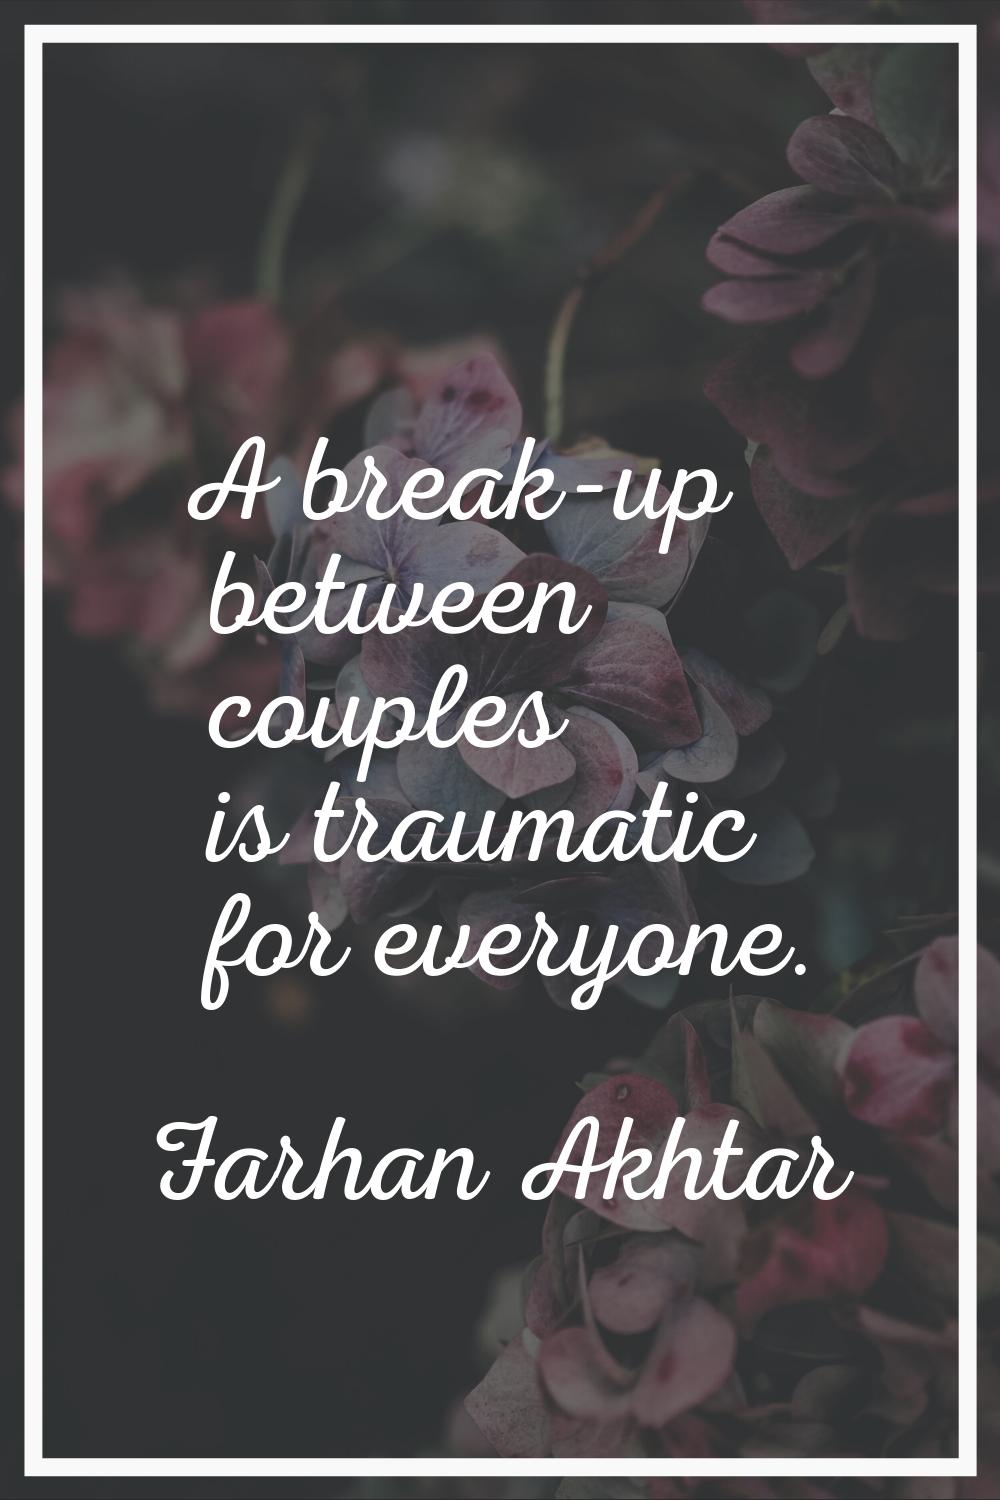 A break-up between couples is traumatic for everyone.